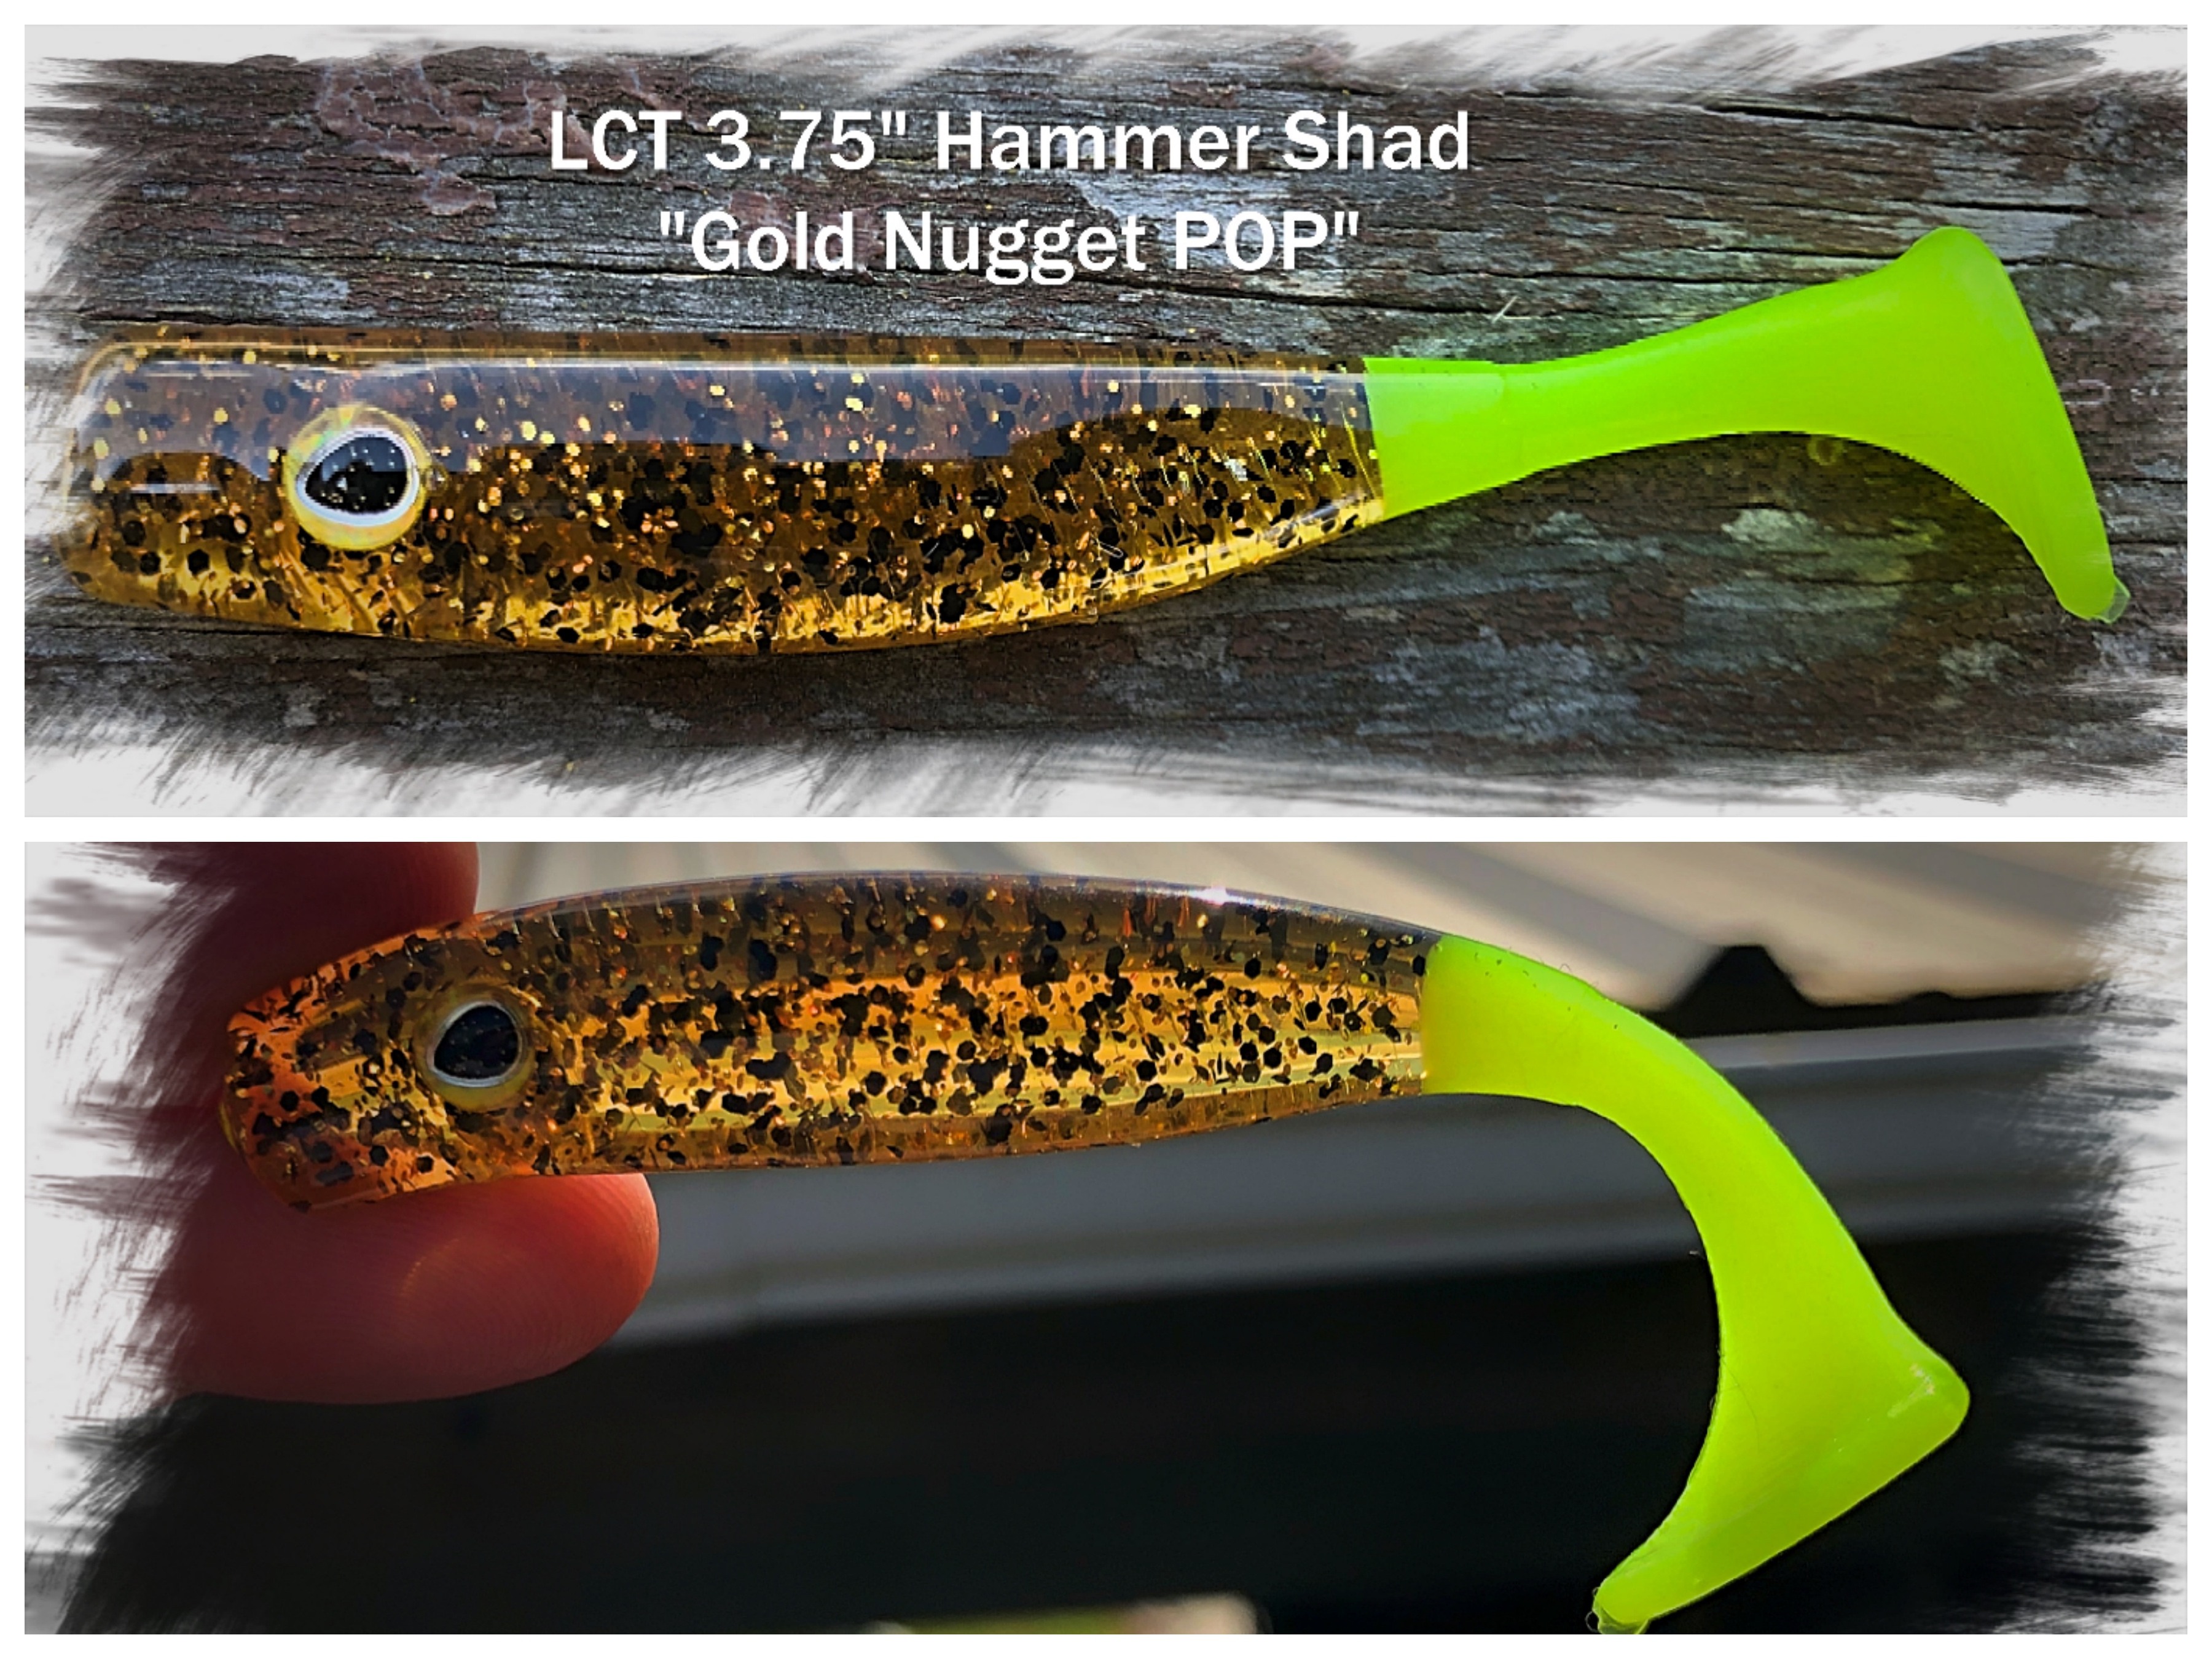 LCT 3.75 Hammer Shad (5 Pack) Gold Nugget POP